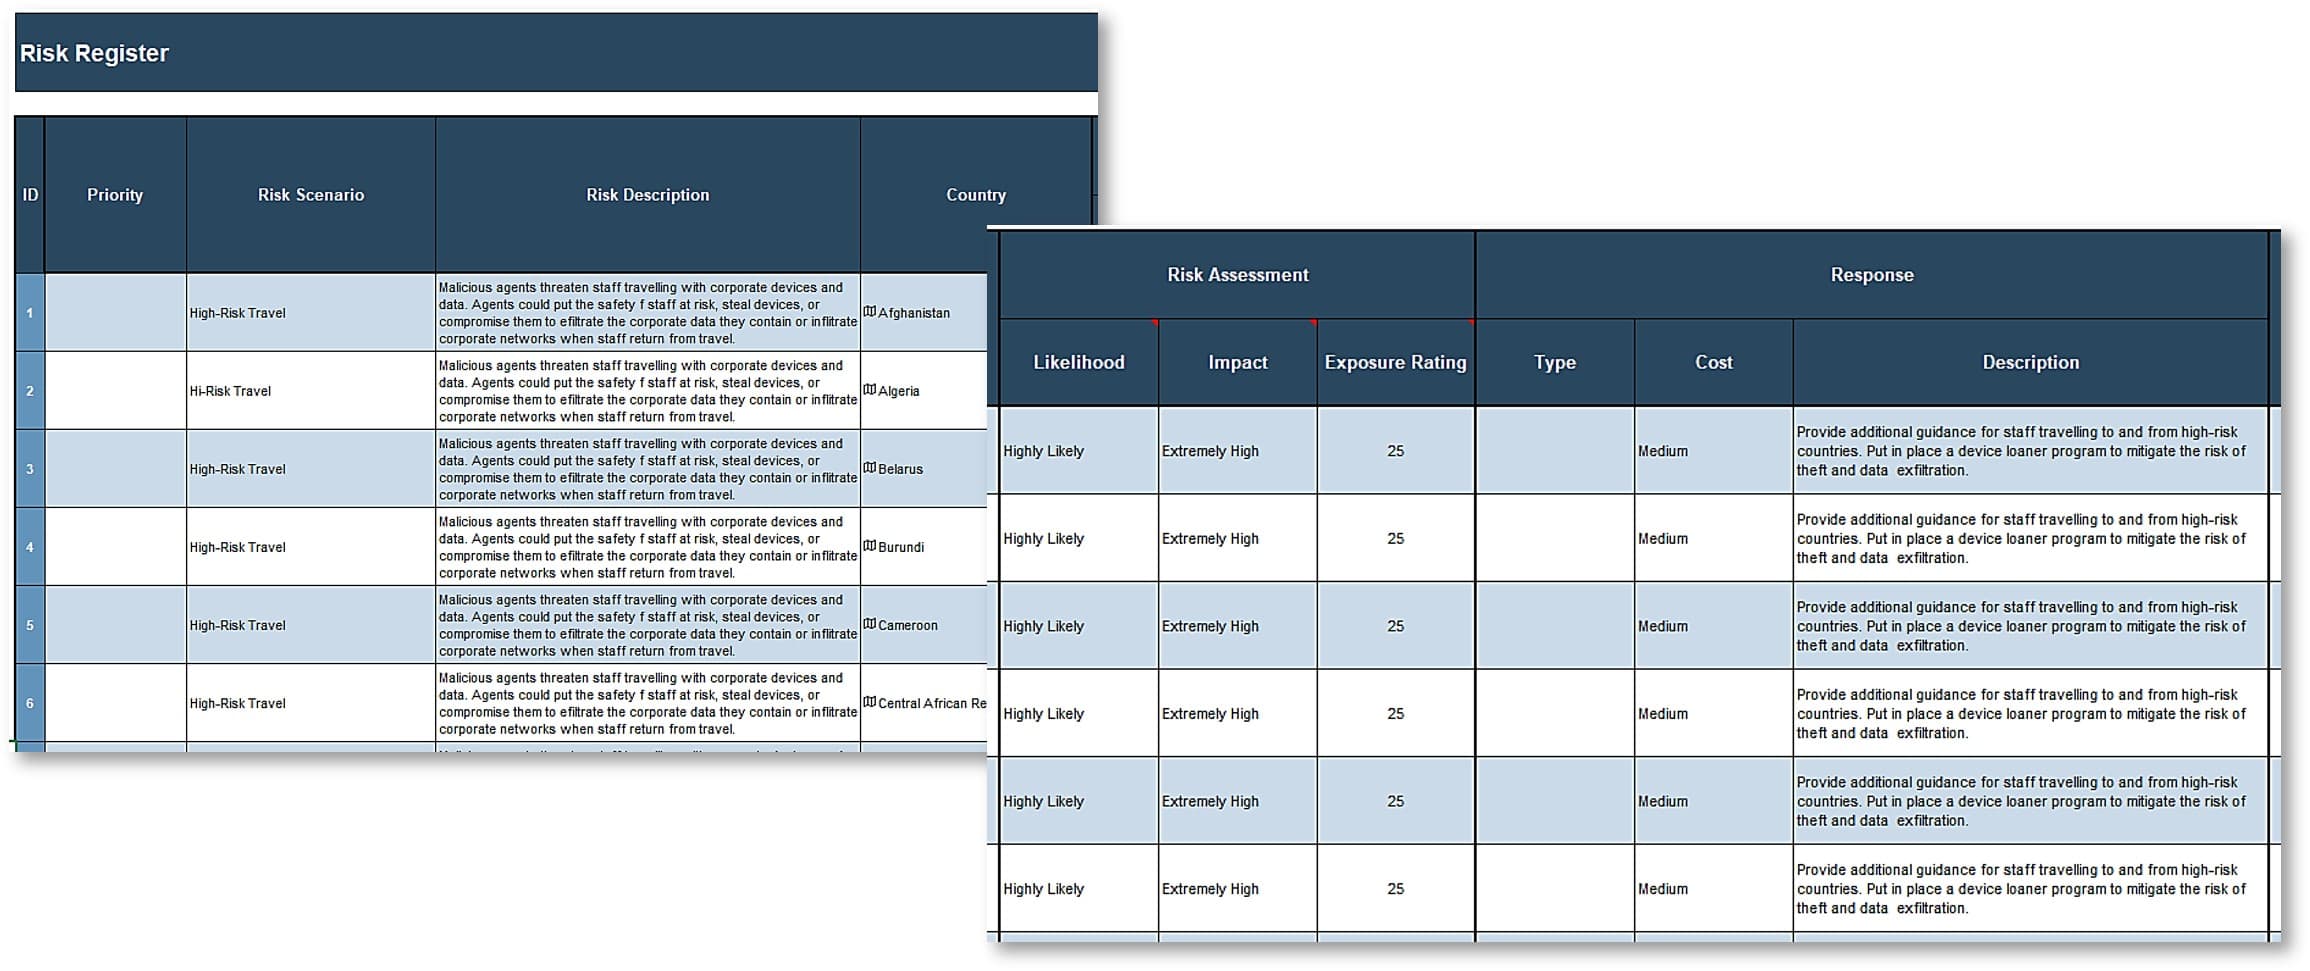 The image contains a screenshot of Info-Tech's Jurisdictional Risk Register and Heatmap Tool.